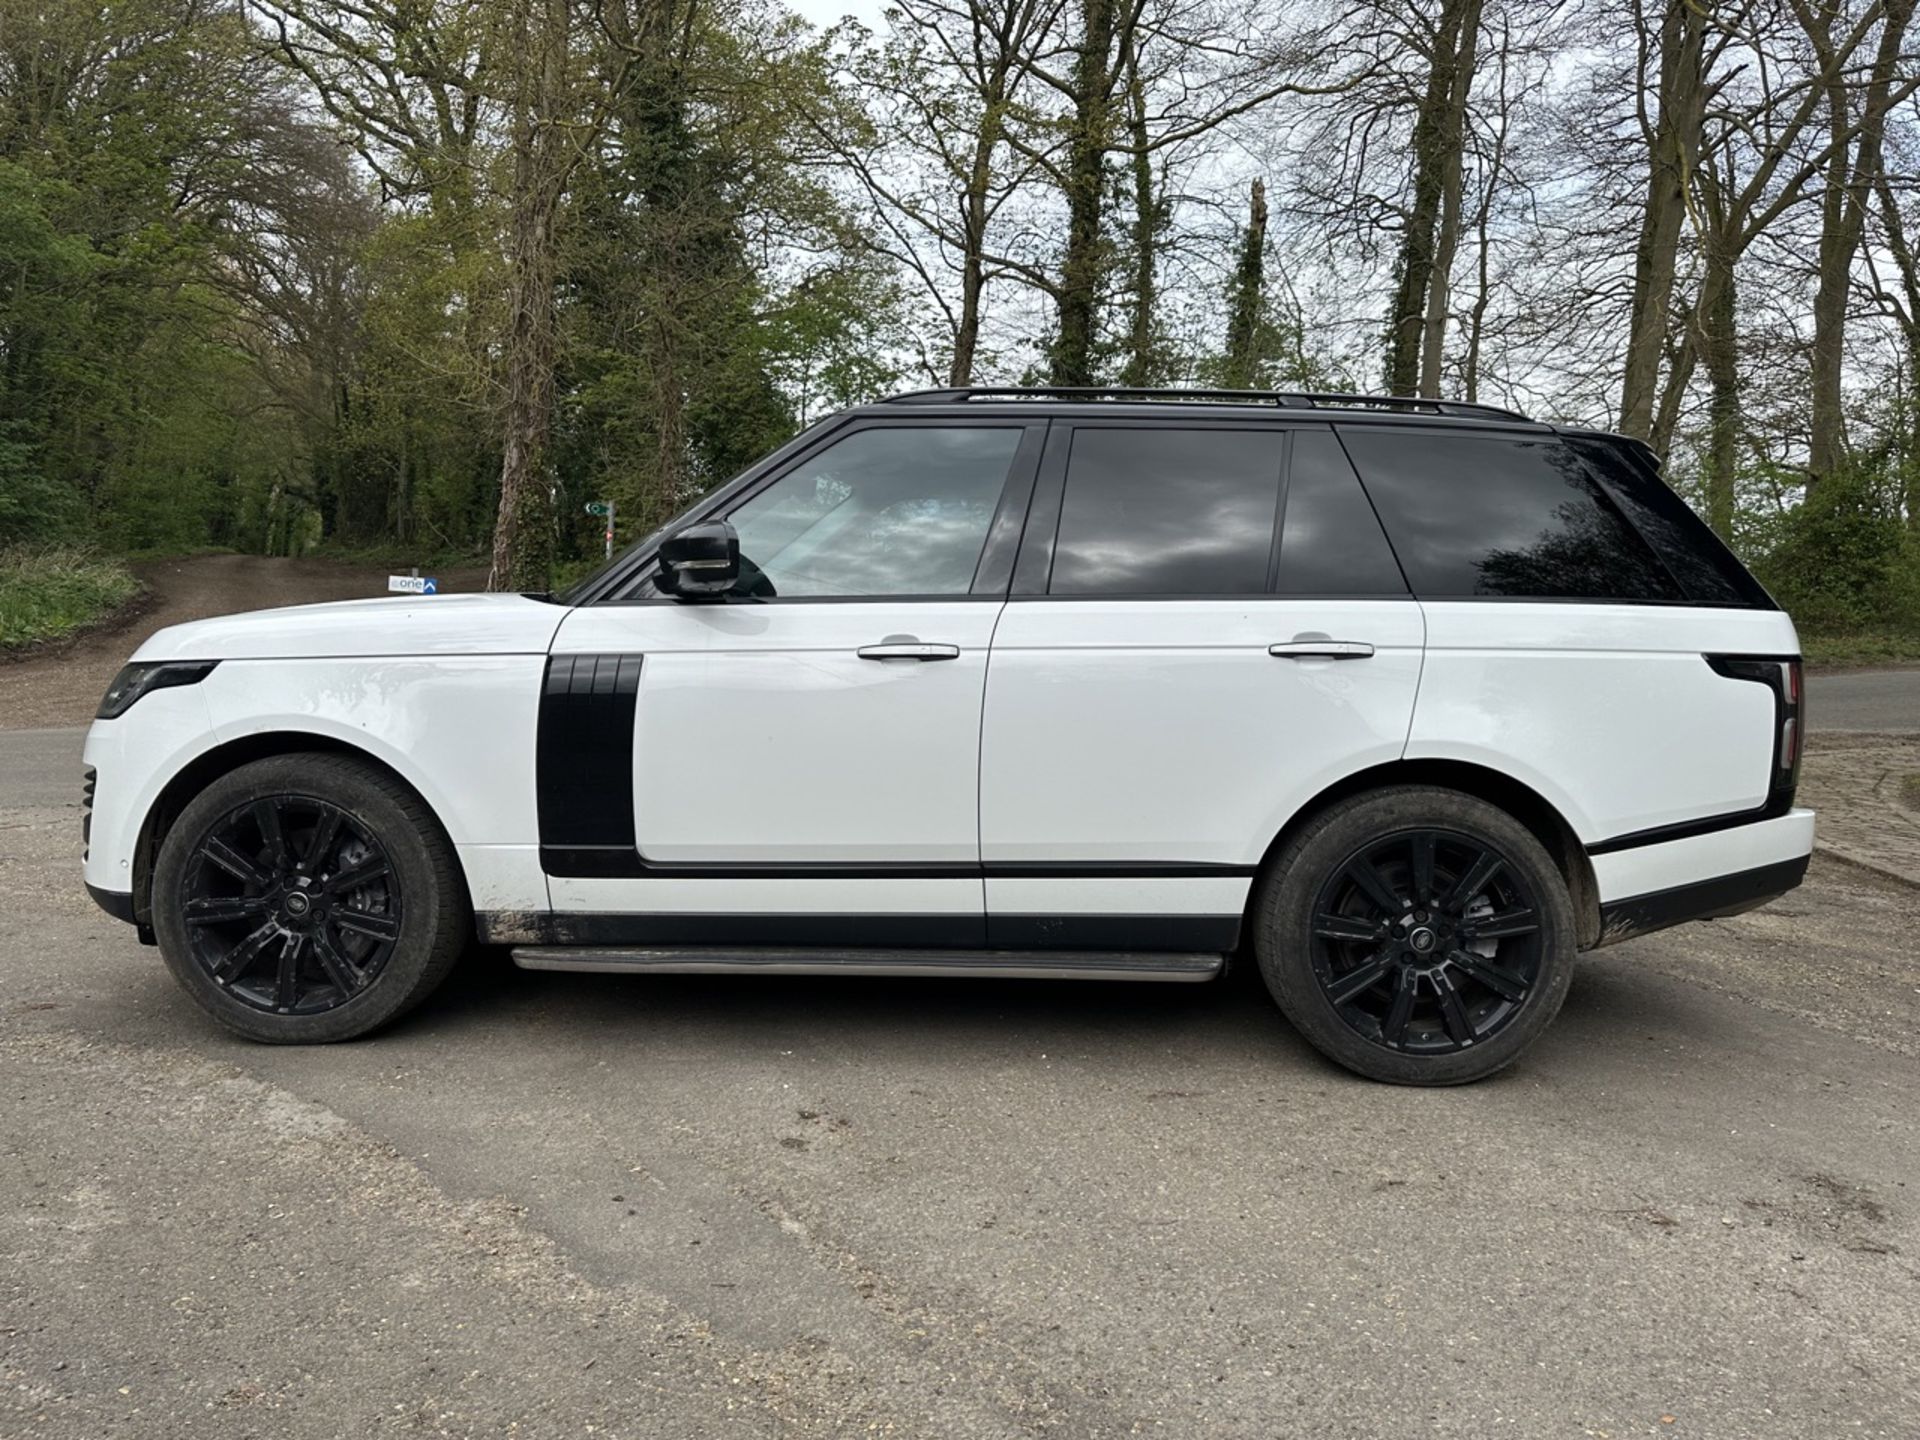 LAND ROVER RANGE ROVER 2.0 P400e Autobiography 4dr Auto - Automatic - 2018 - 31k miles - FULL SH - Image 3 of 22